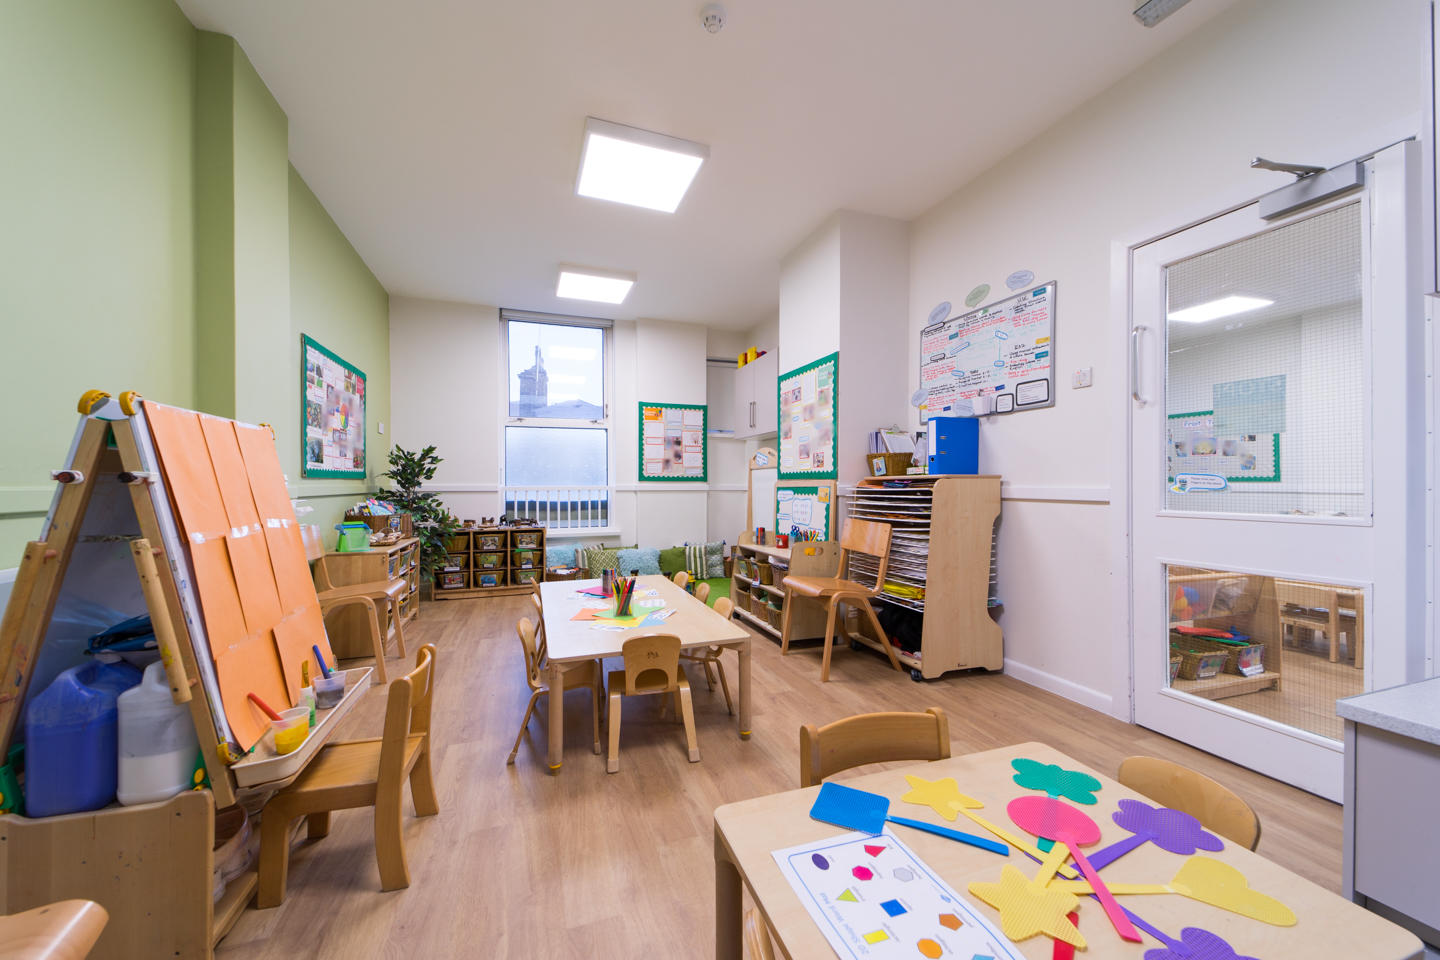 Images Bright Horizons East Greenwich Day Nursery and Preschool